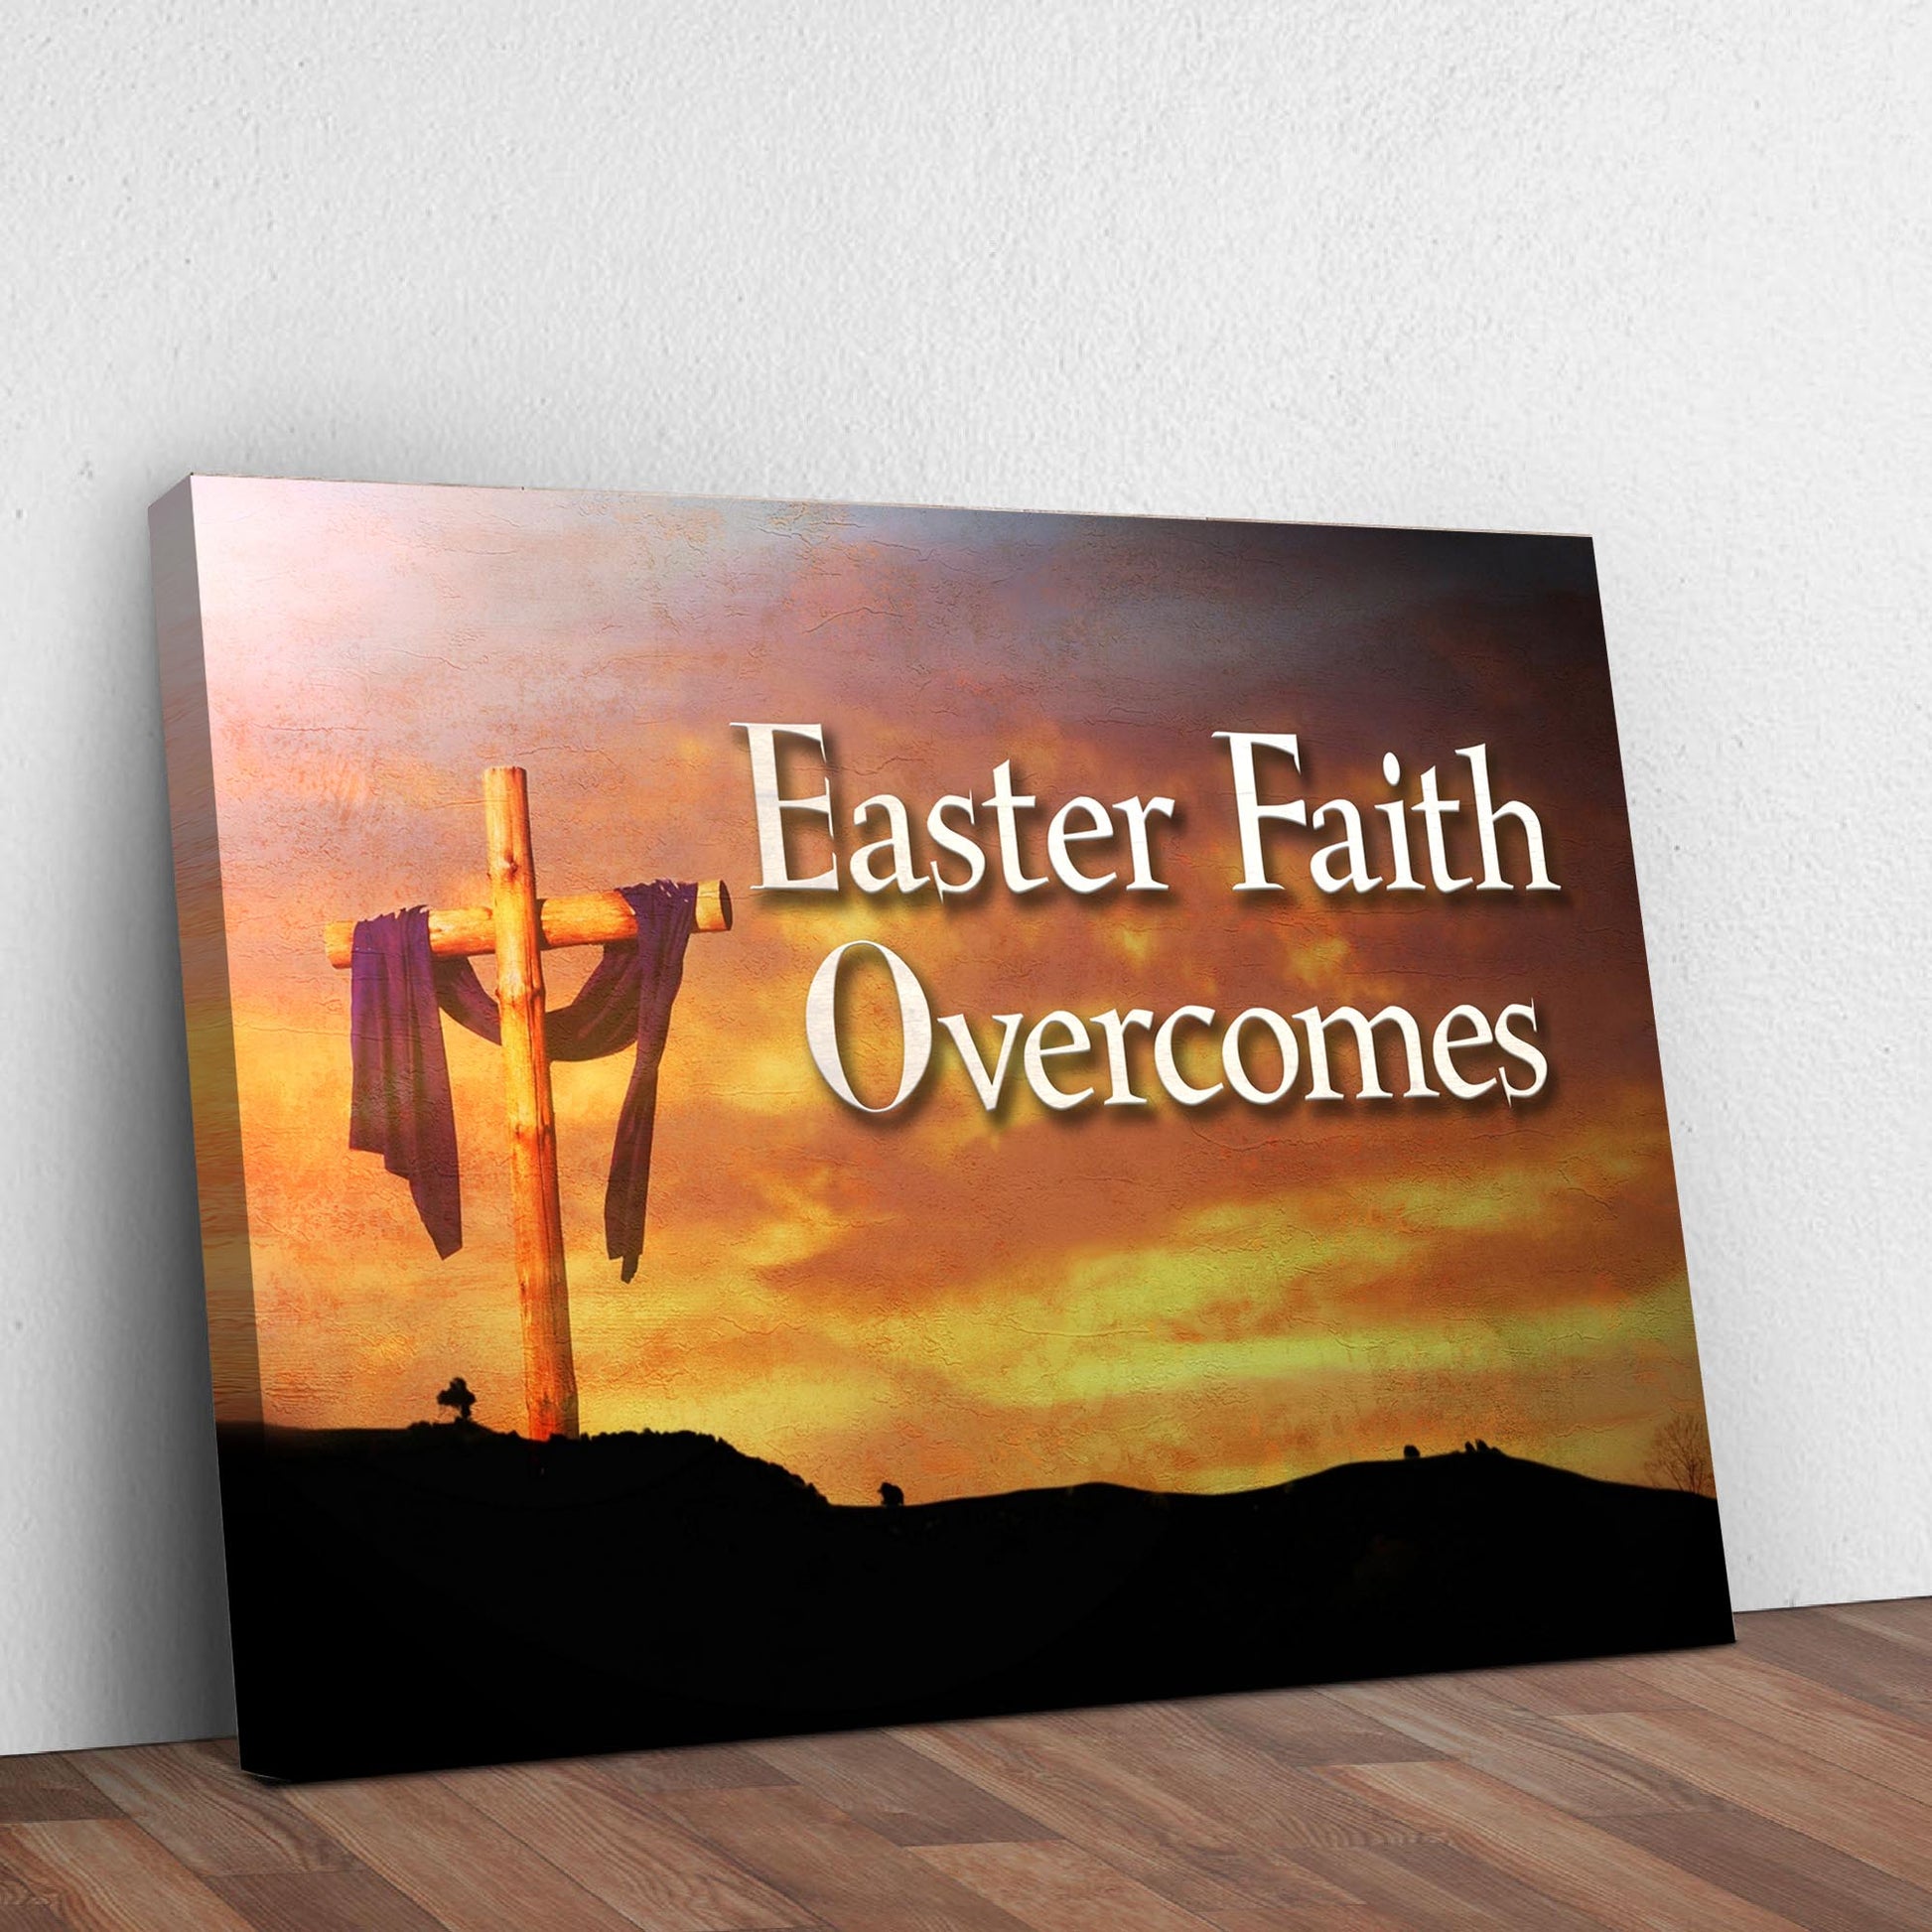 Easter Faith Overcomes Sign Style 2 - Image by Tailored Canvases